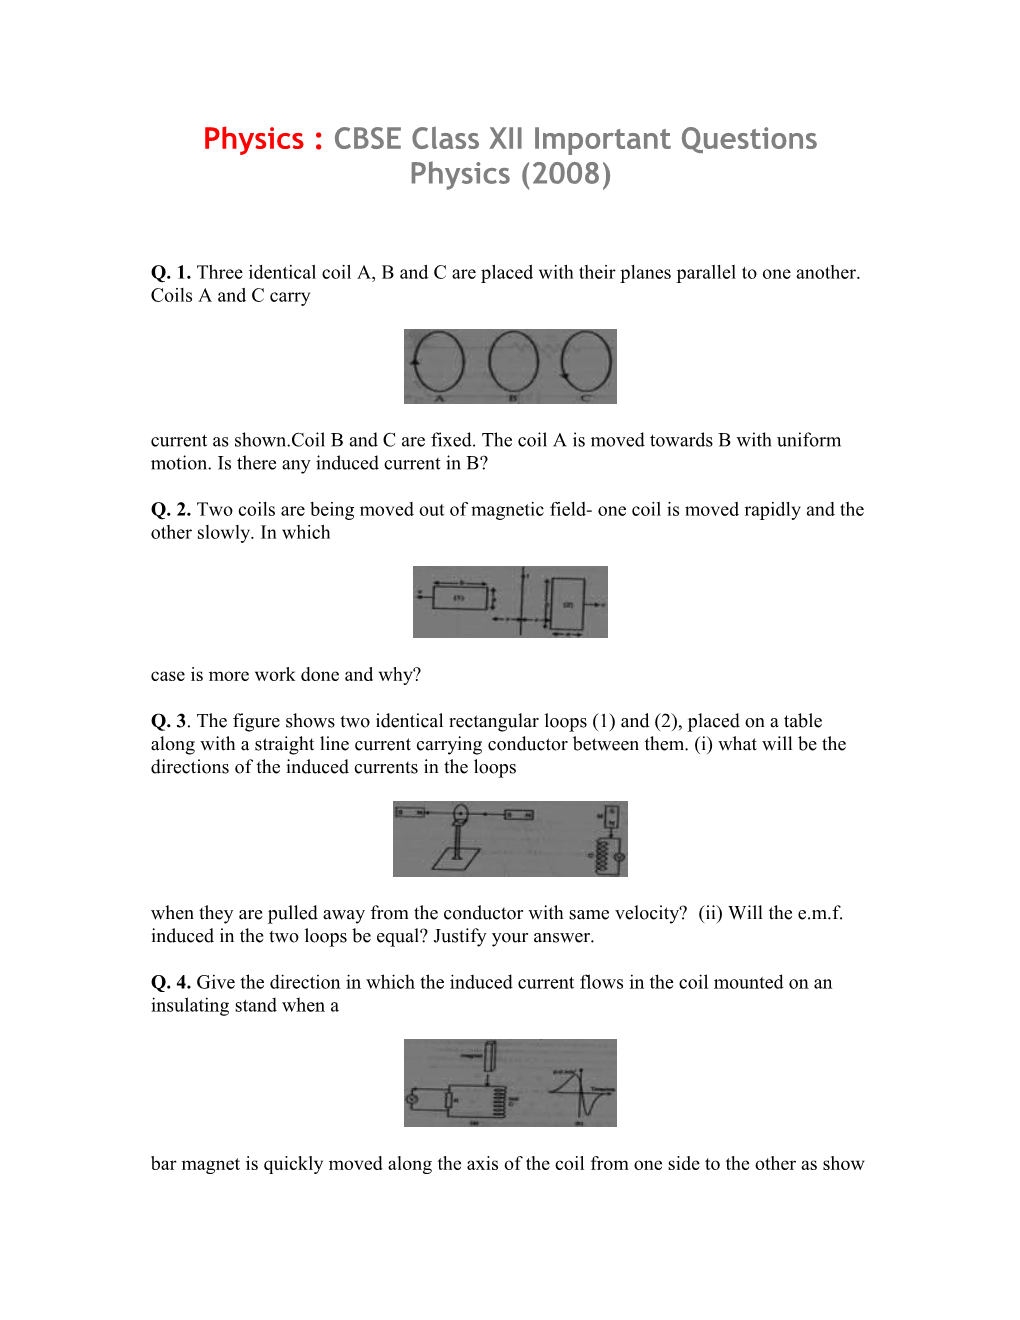 Physics : CBSE Class XII Important Questions Physics (2008)